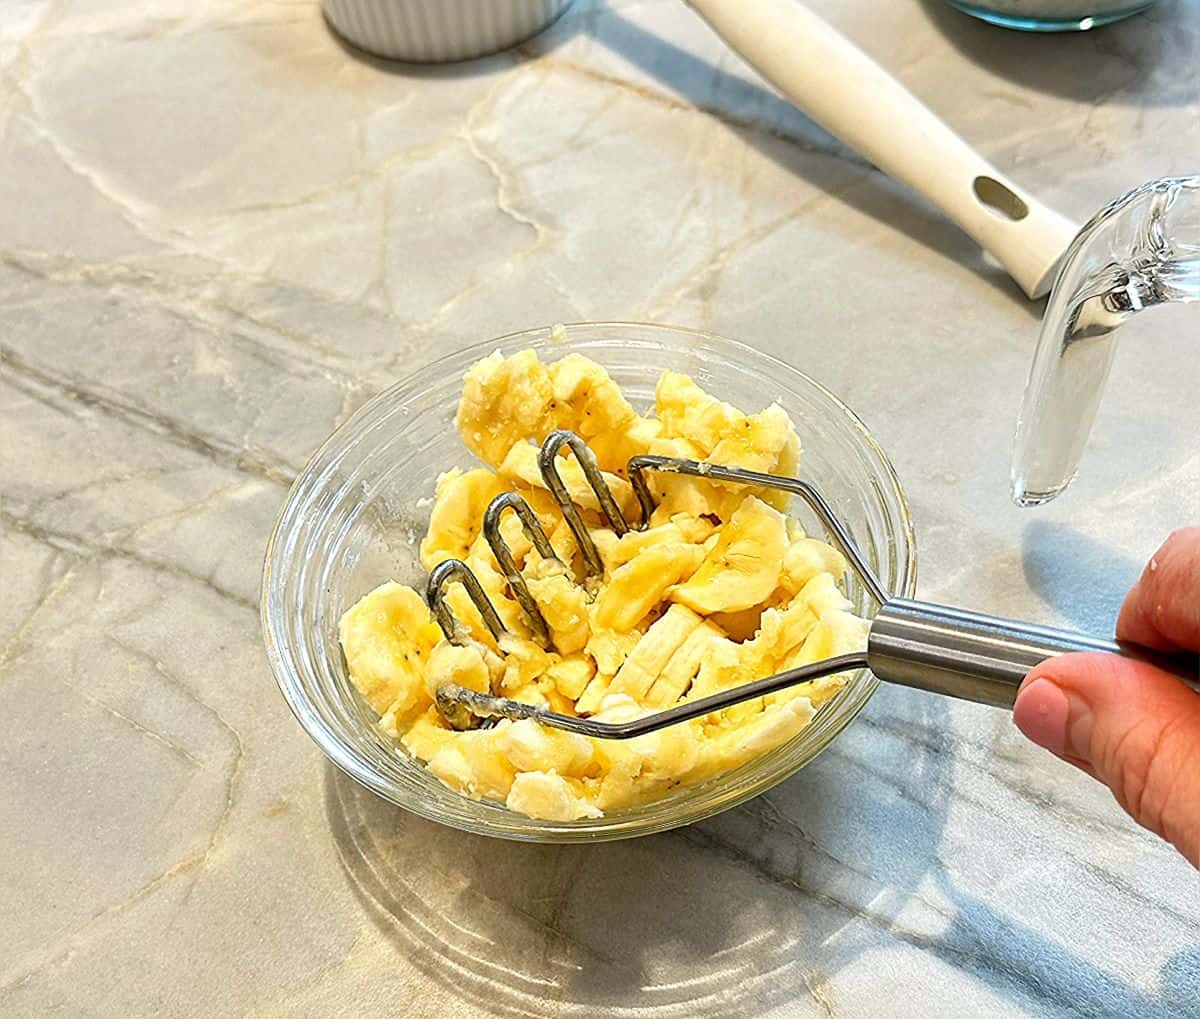 Mashing bananas in a small bowl with a small potato masher.